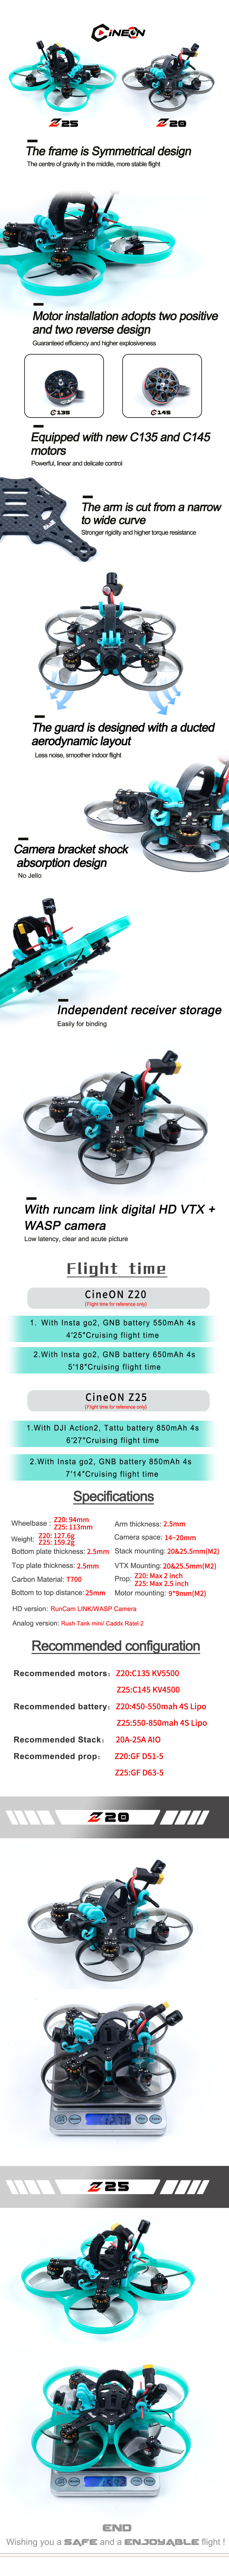 Axisflying cineon Z20 / 2 inch cinewhoop / sub250g fpv drone -4S BNF (Clear Gray) Z20 BNF drone cinematic drone,cinewhoop drone,longrange drone,freestyle drone,fpv drone,fpv quads,3.5" cinematic drone,3.5" cinematic quads,3.5" cinewhoop quads,3"cinewhoop quads,3"cinematic quads,the same as dji quads,2.5" whoop,2.5"cinewhoop,2.5"indoor drone,2.5" frame,sub250g,sub250gfpv,2"cinewhoop,2"indoor drone